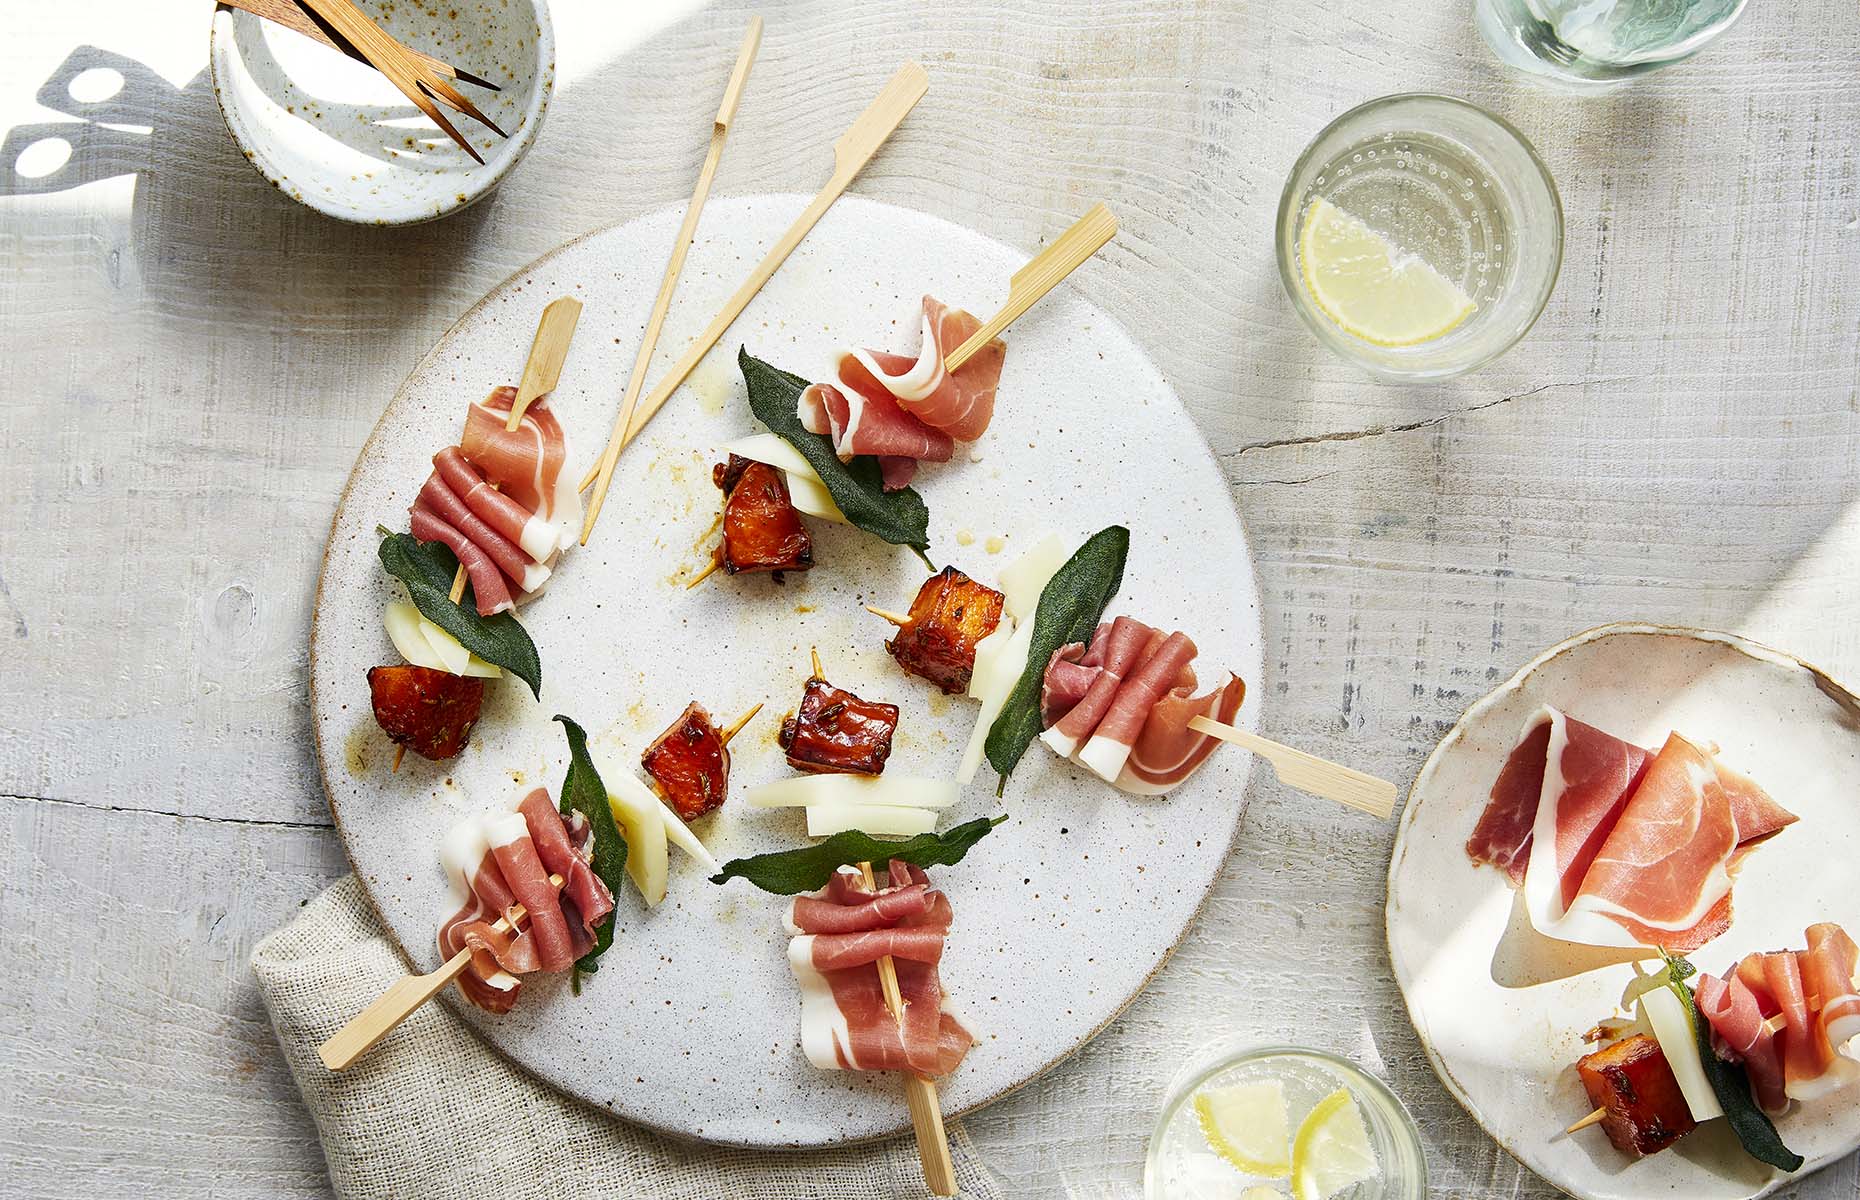 Parma Ham and butternut squash skewers (Image: Proscioutto di Parma/loveFOOD)